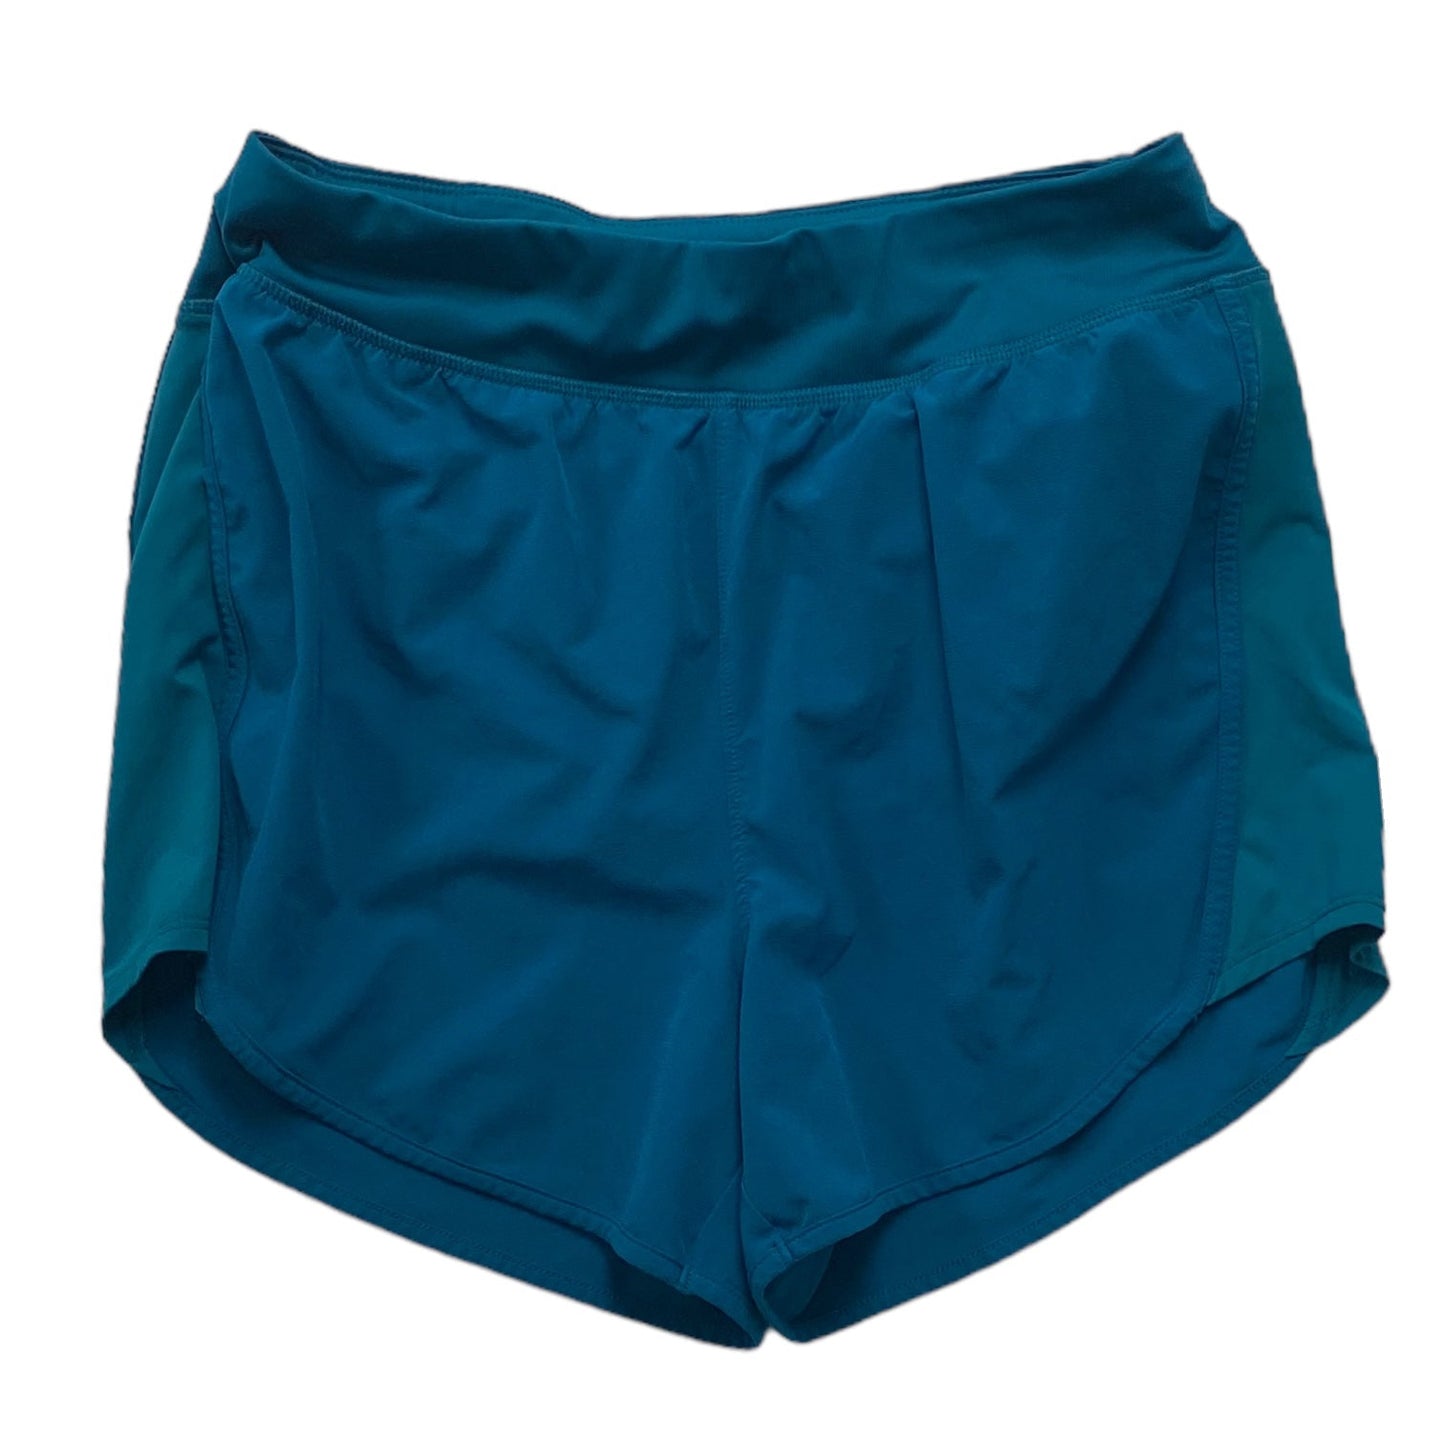 Teal Athletic Shorts All In Motion, Size S